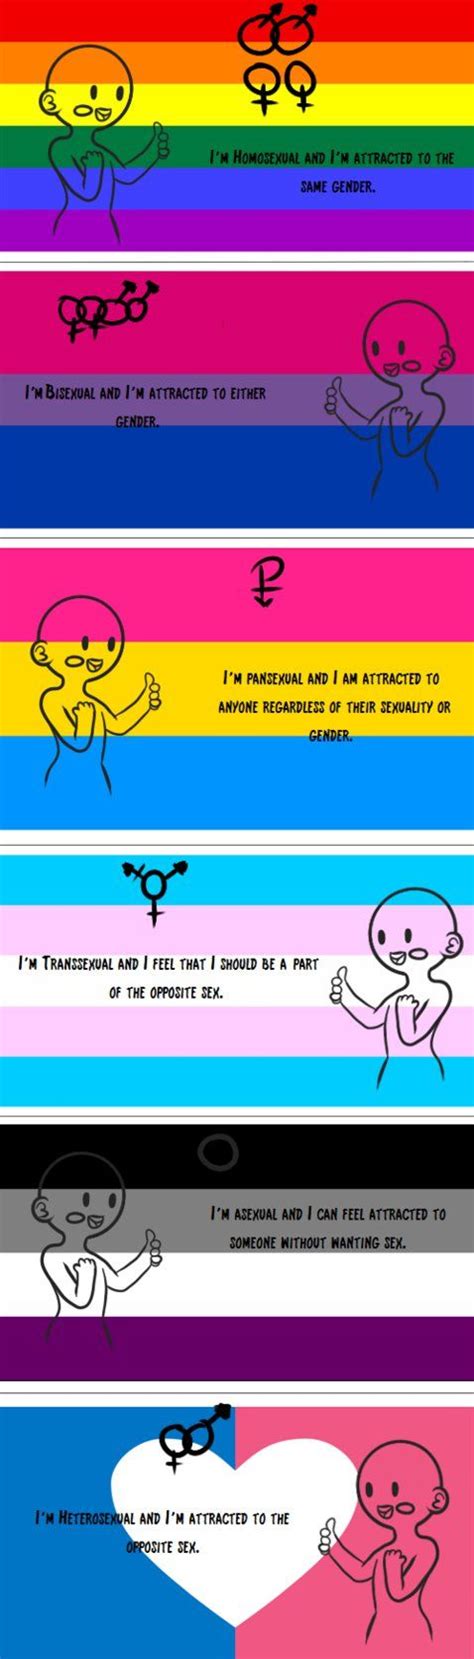 30 Best Images About Lgbtq Flags On Pinterest The Flag Genderqueer